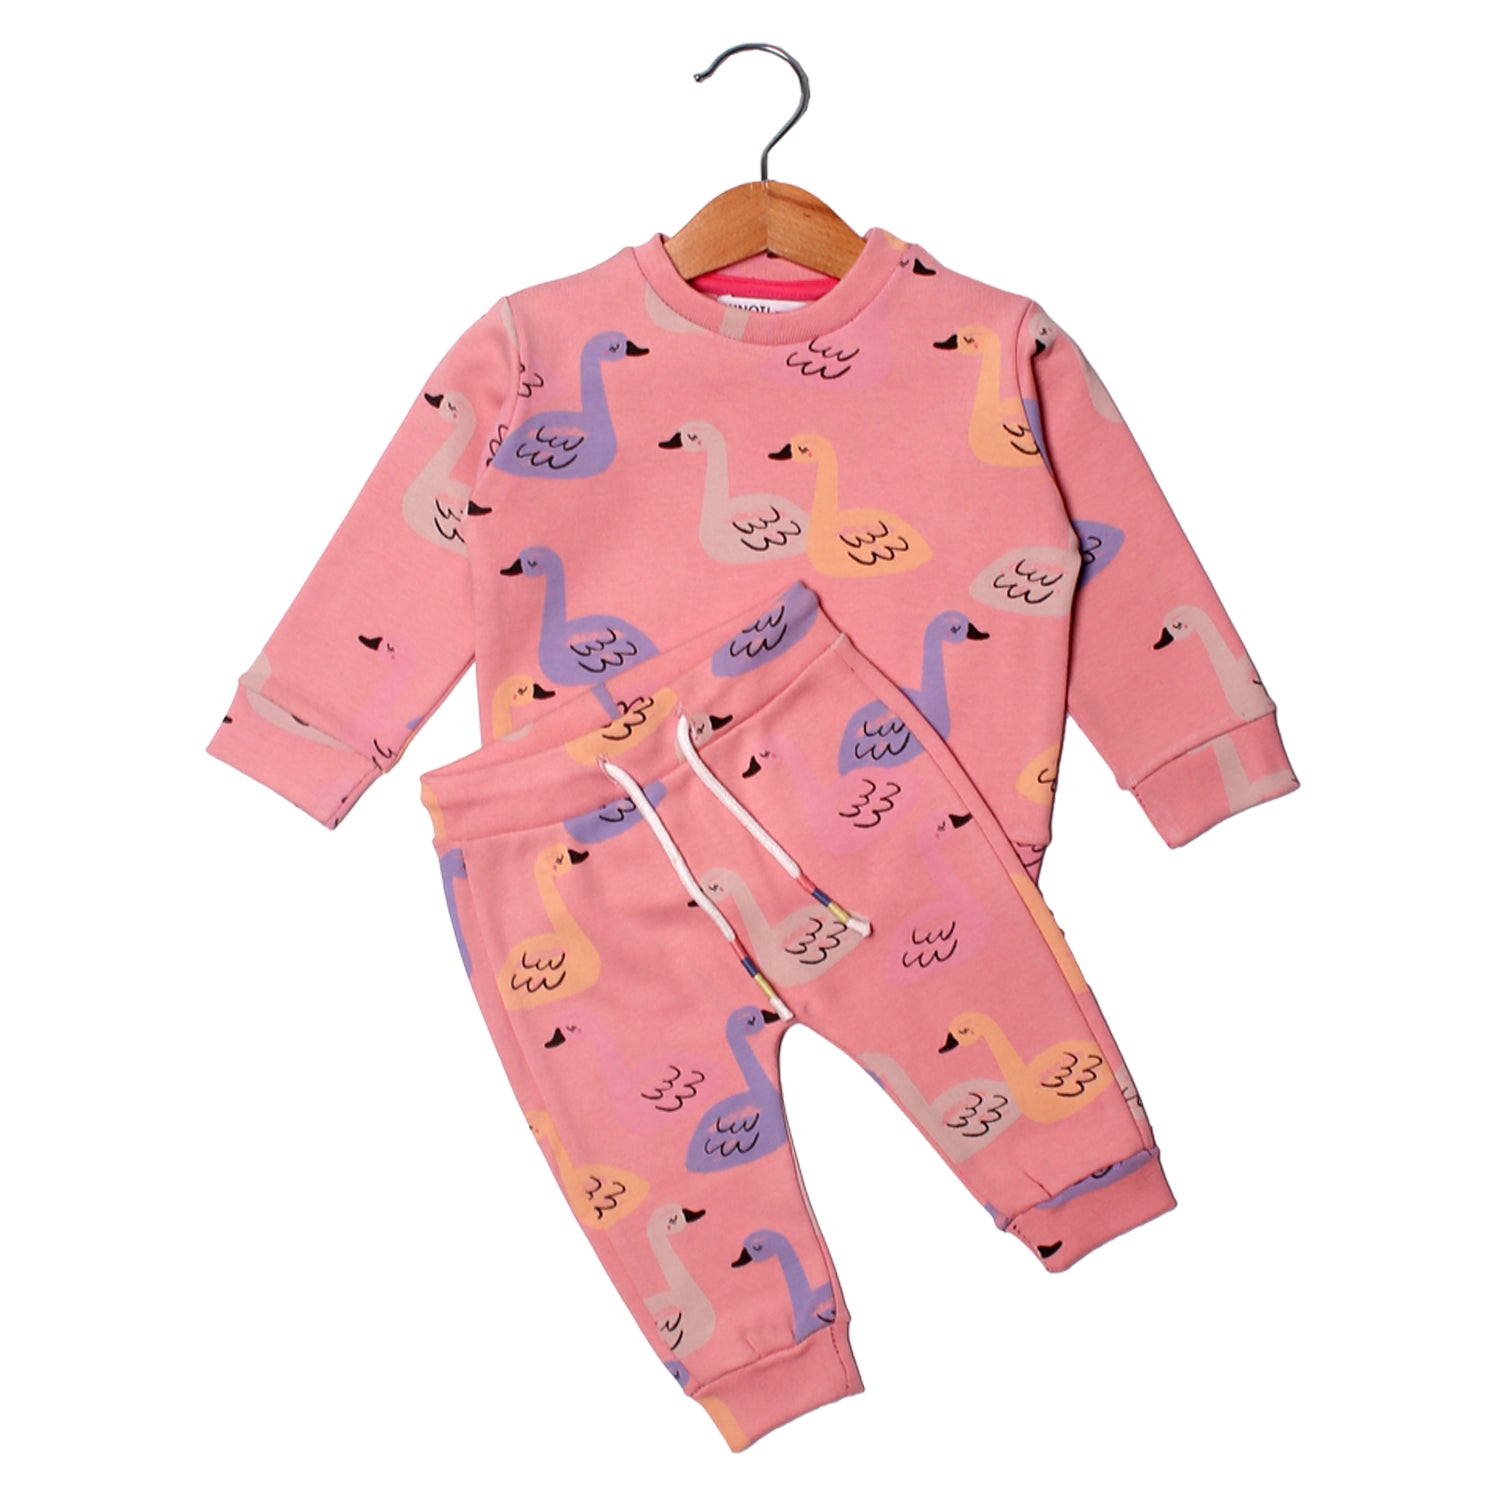 NEW PINK DUCK PRINTED SUIT FOR BOTH